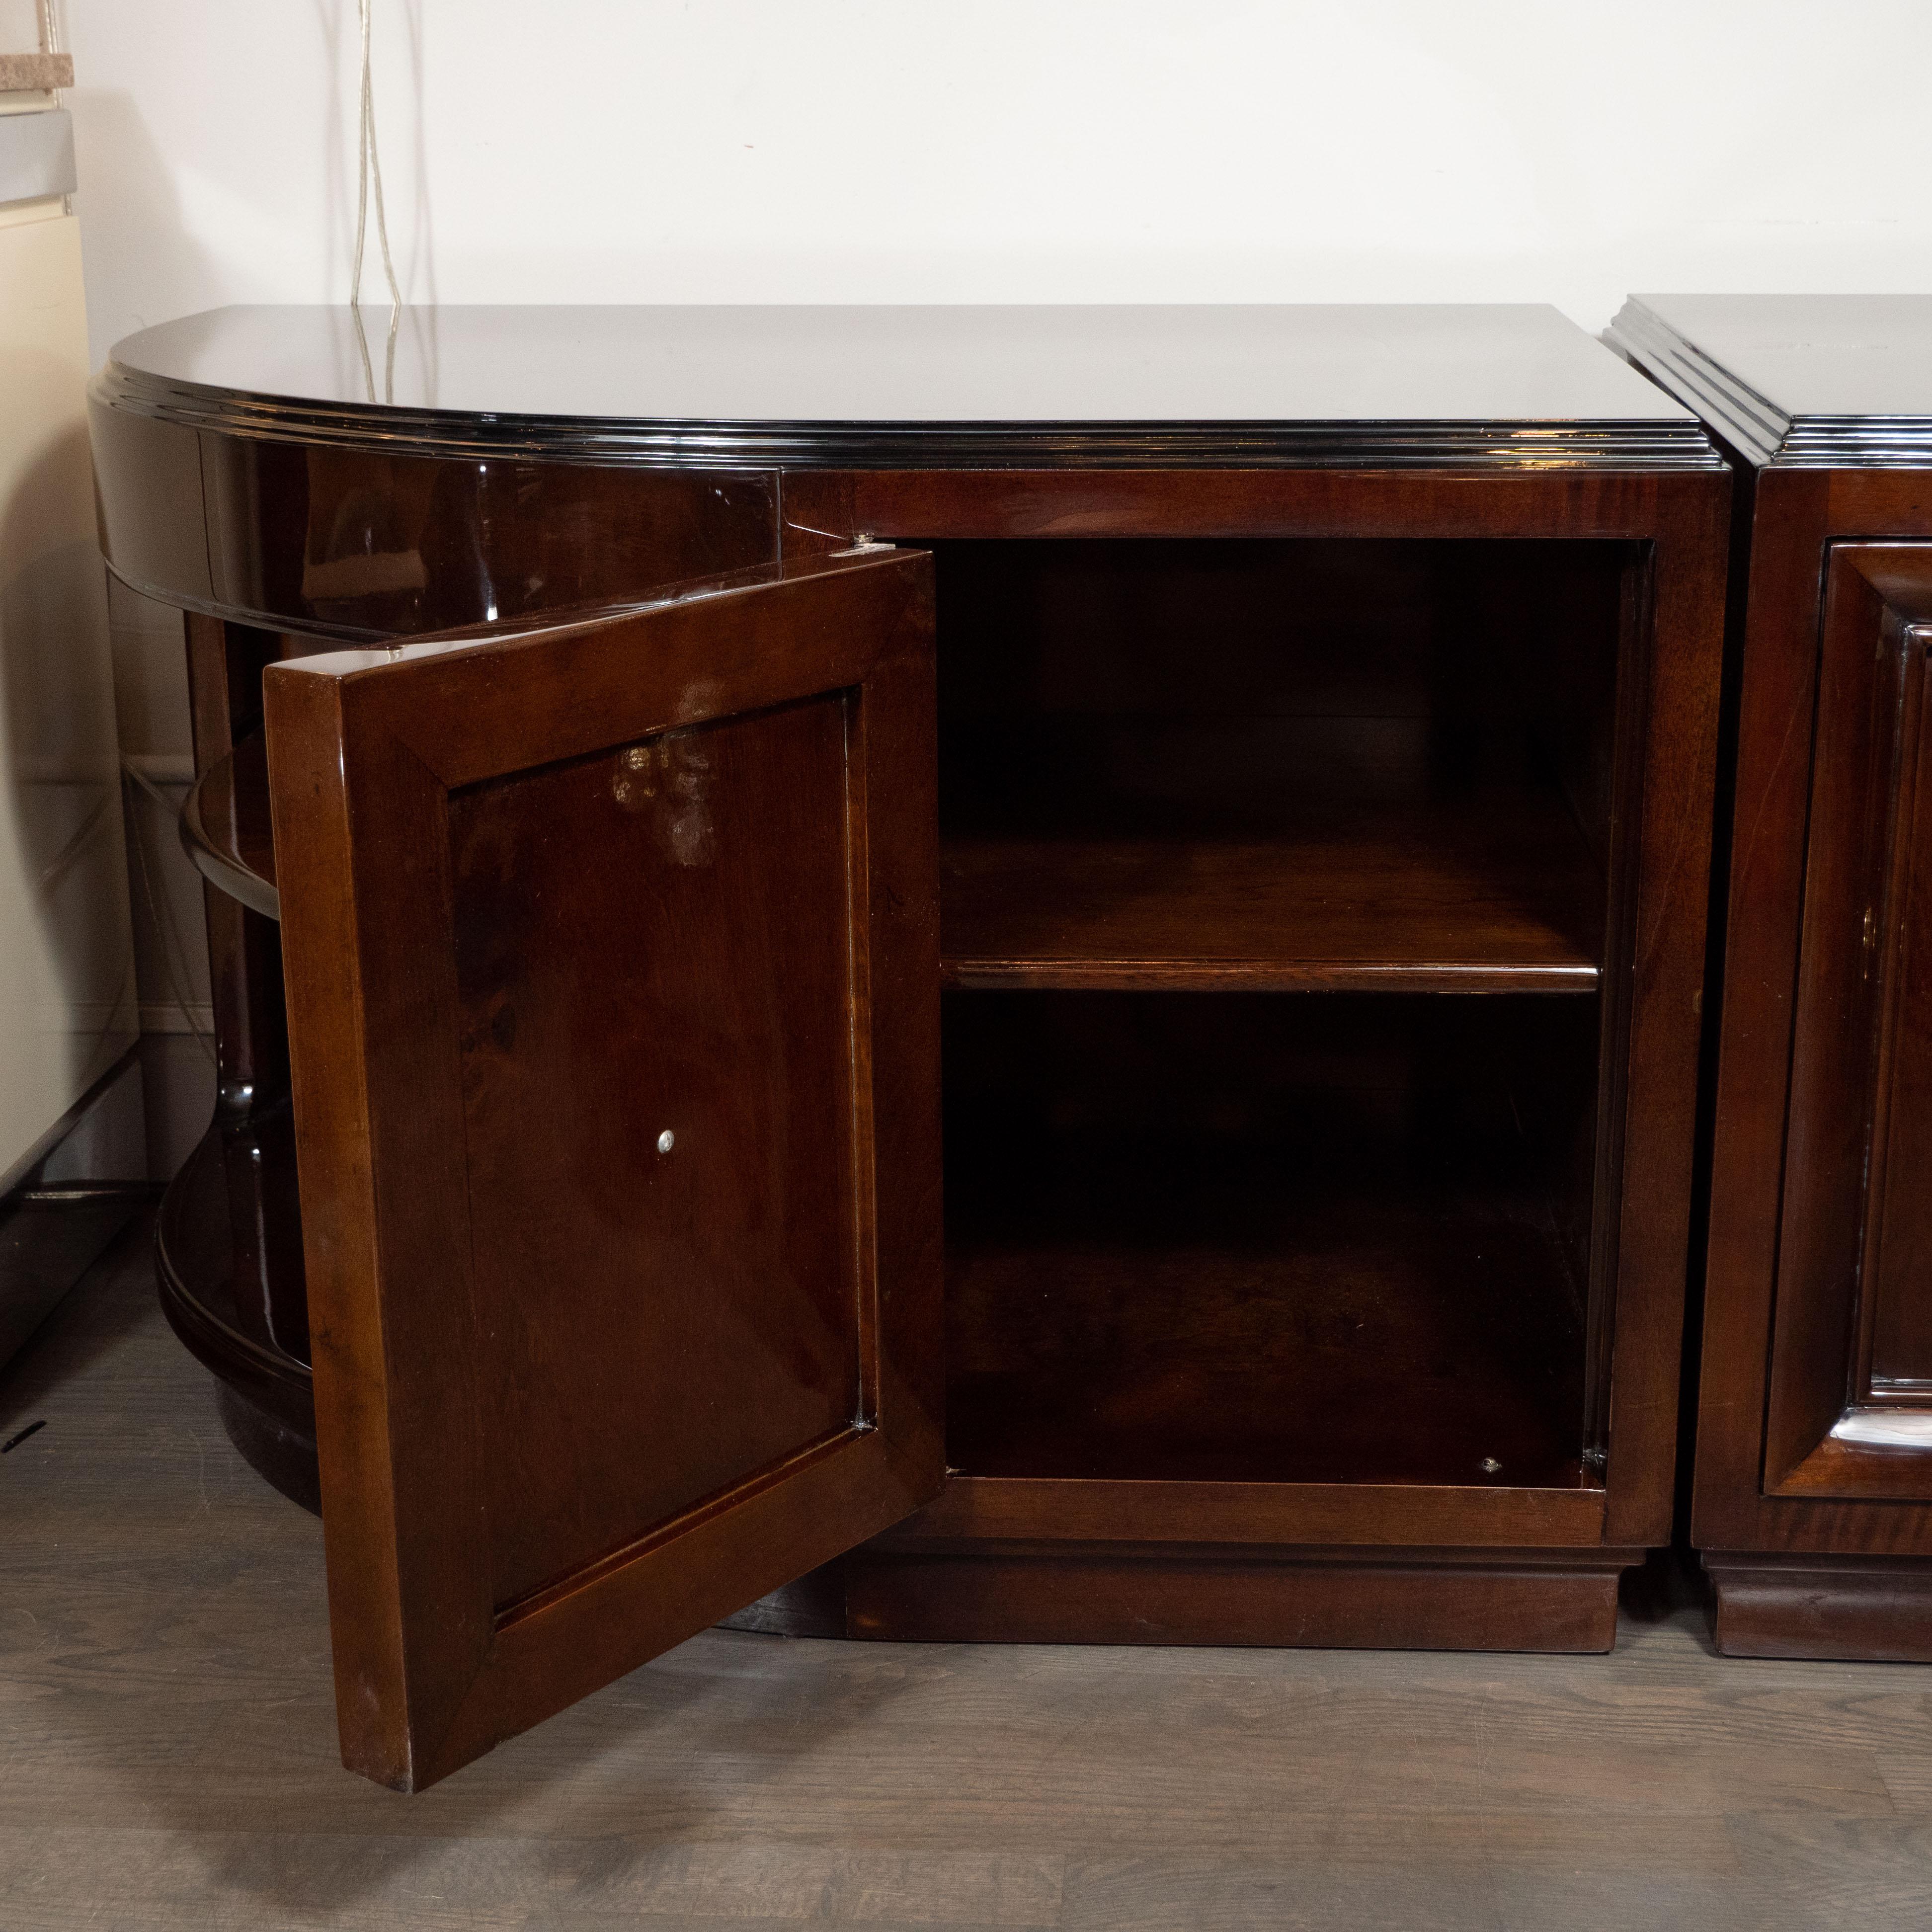 Gilt Pair of Art Deco Walnut End Tables/Nightstands with Gilded Pulls, Grosfeld House